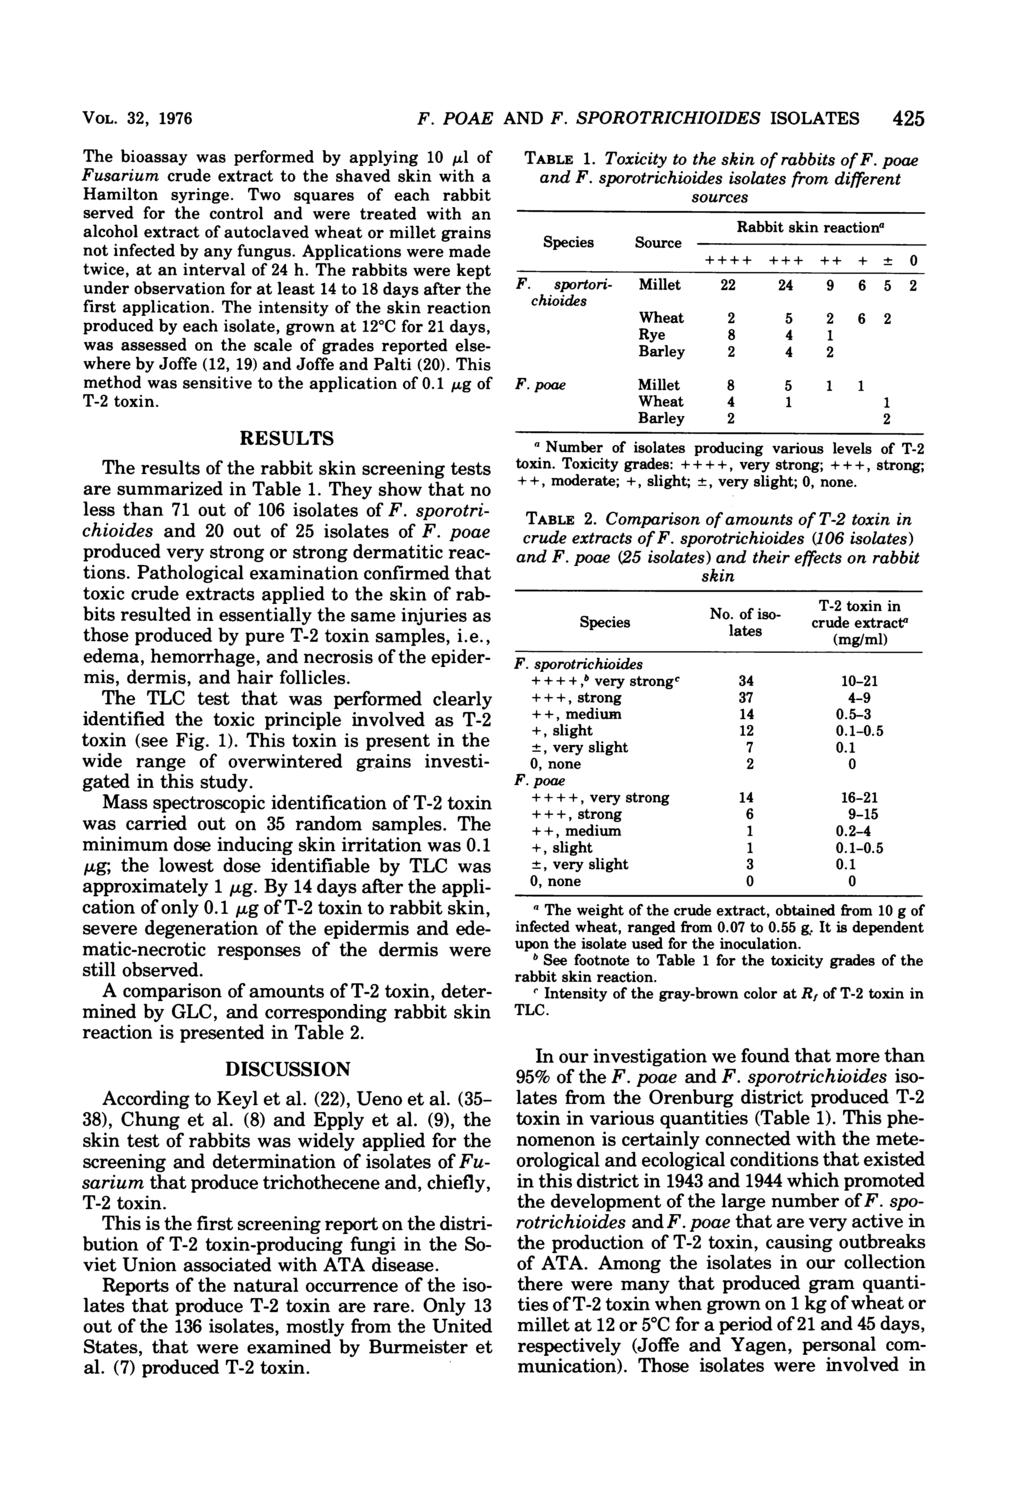 VOL. 32, 1976 The bioassay was performed by applying 10 1.l of Fusarium crude extract to the shaved skin with a Hamilton syringe.